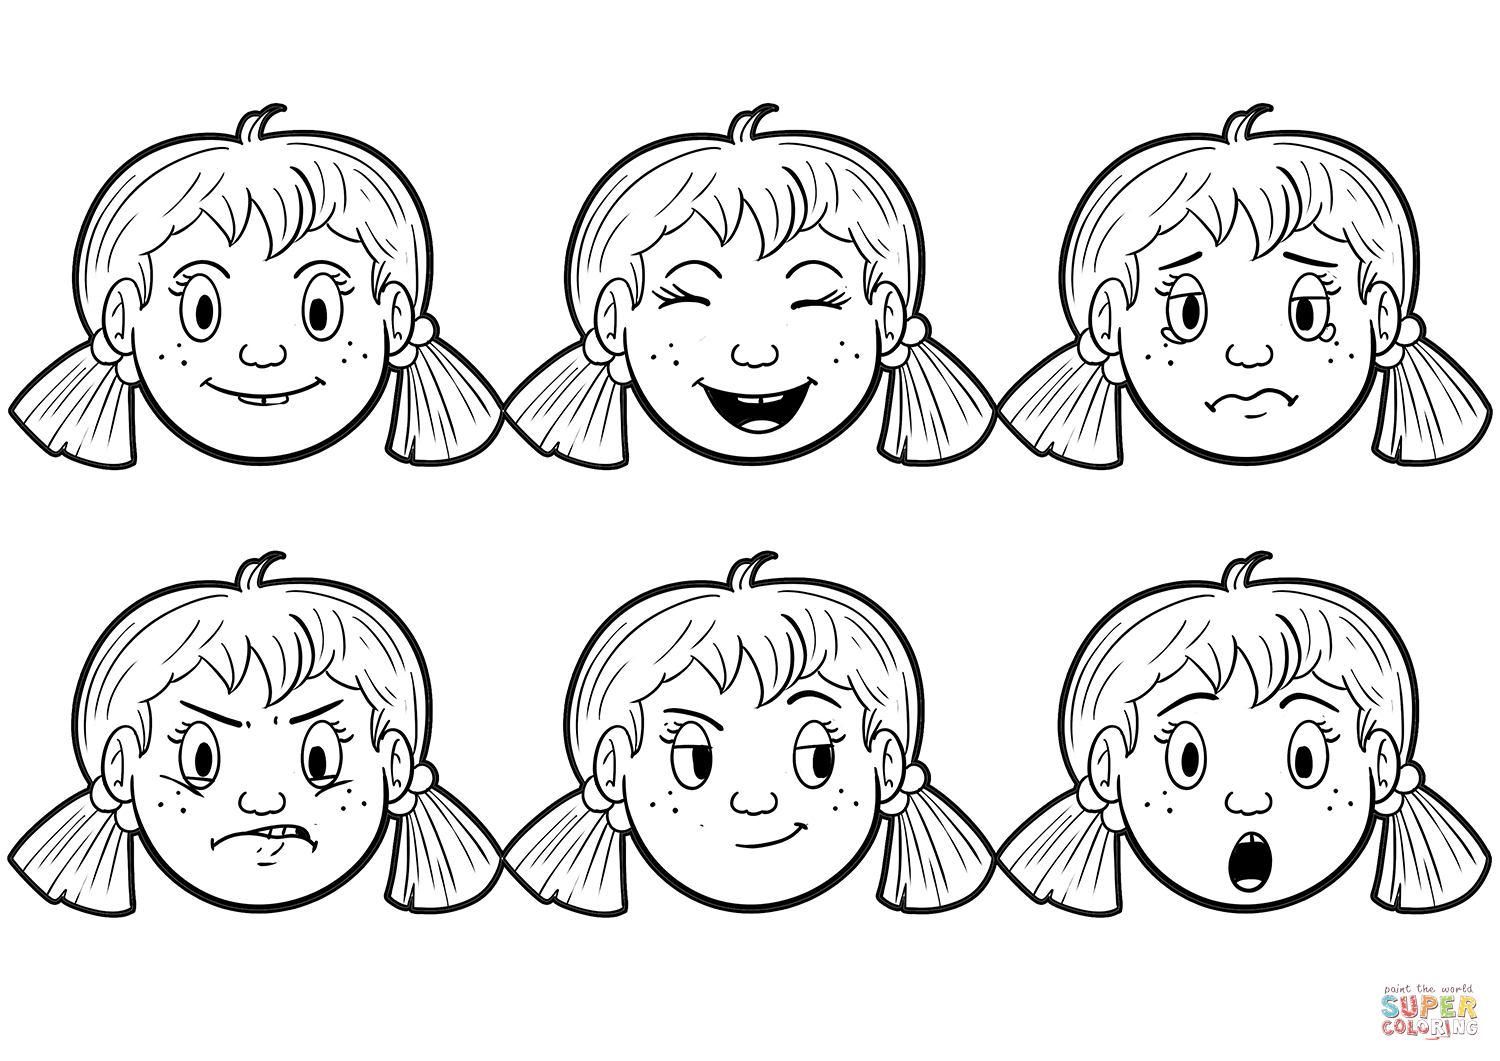 Girls emotion mood face chart coloring page free printable coloring pages